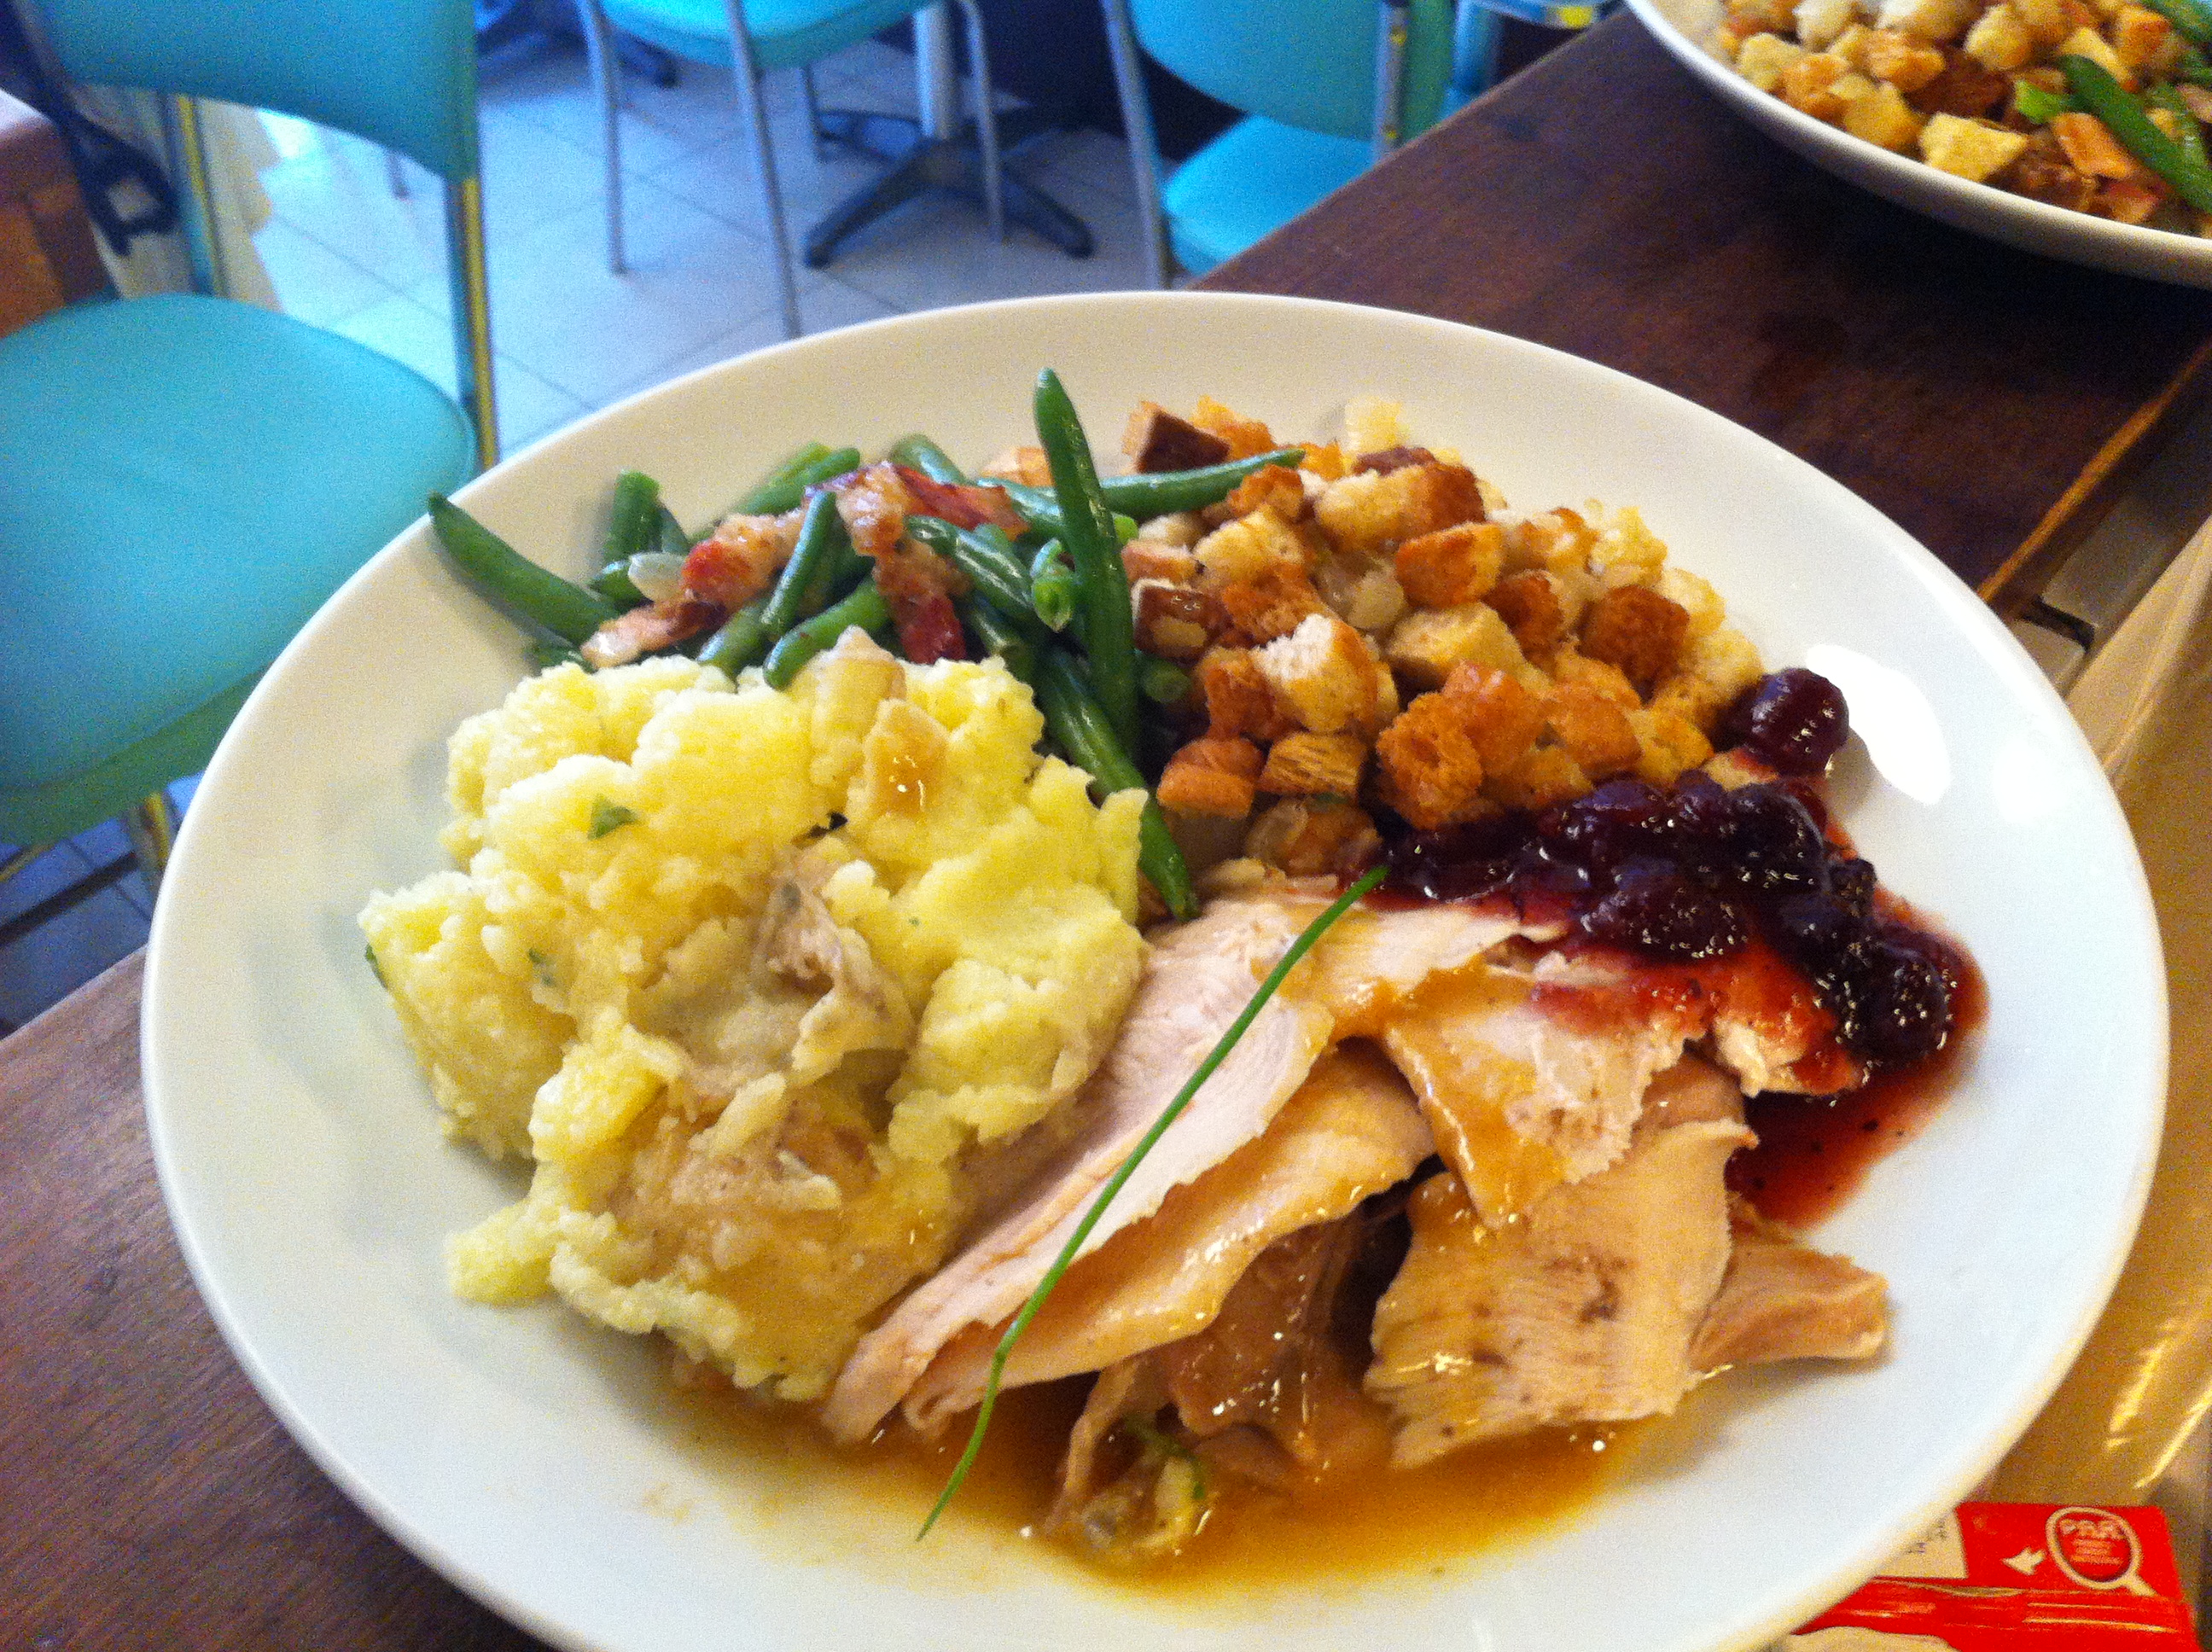 Thanksgiving Dinner in Rio at the Gringo Café: Sponsored